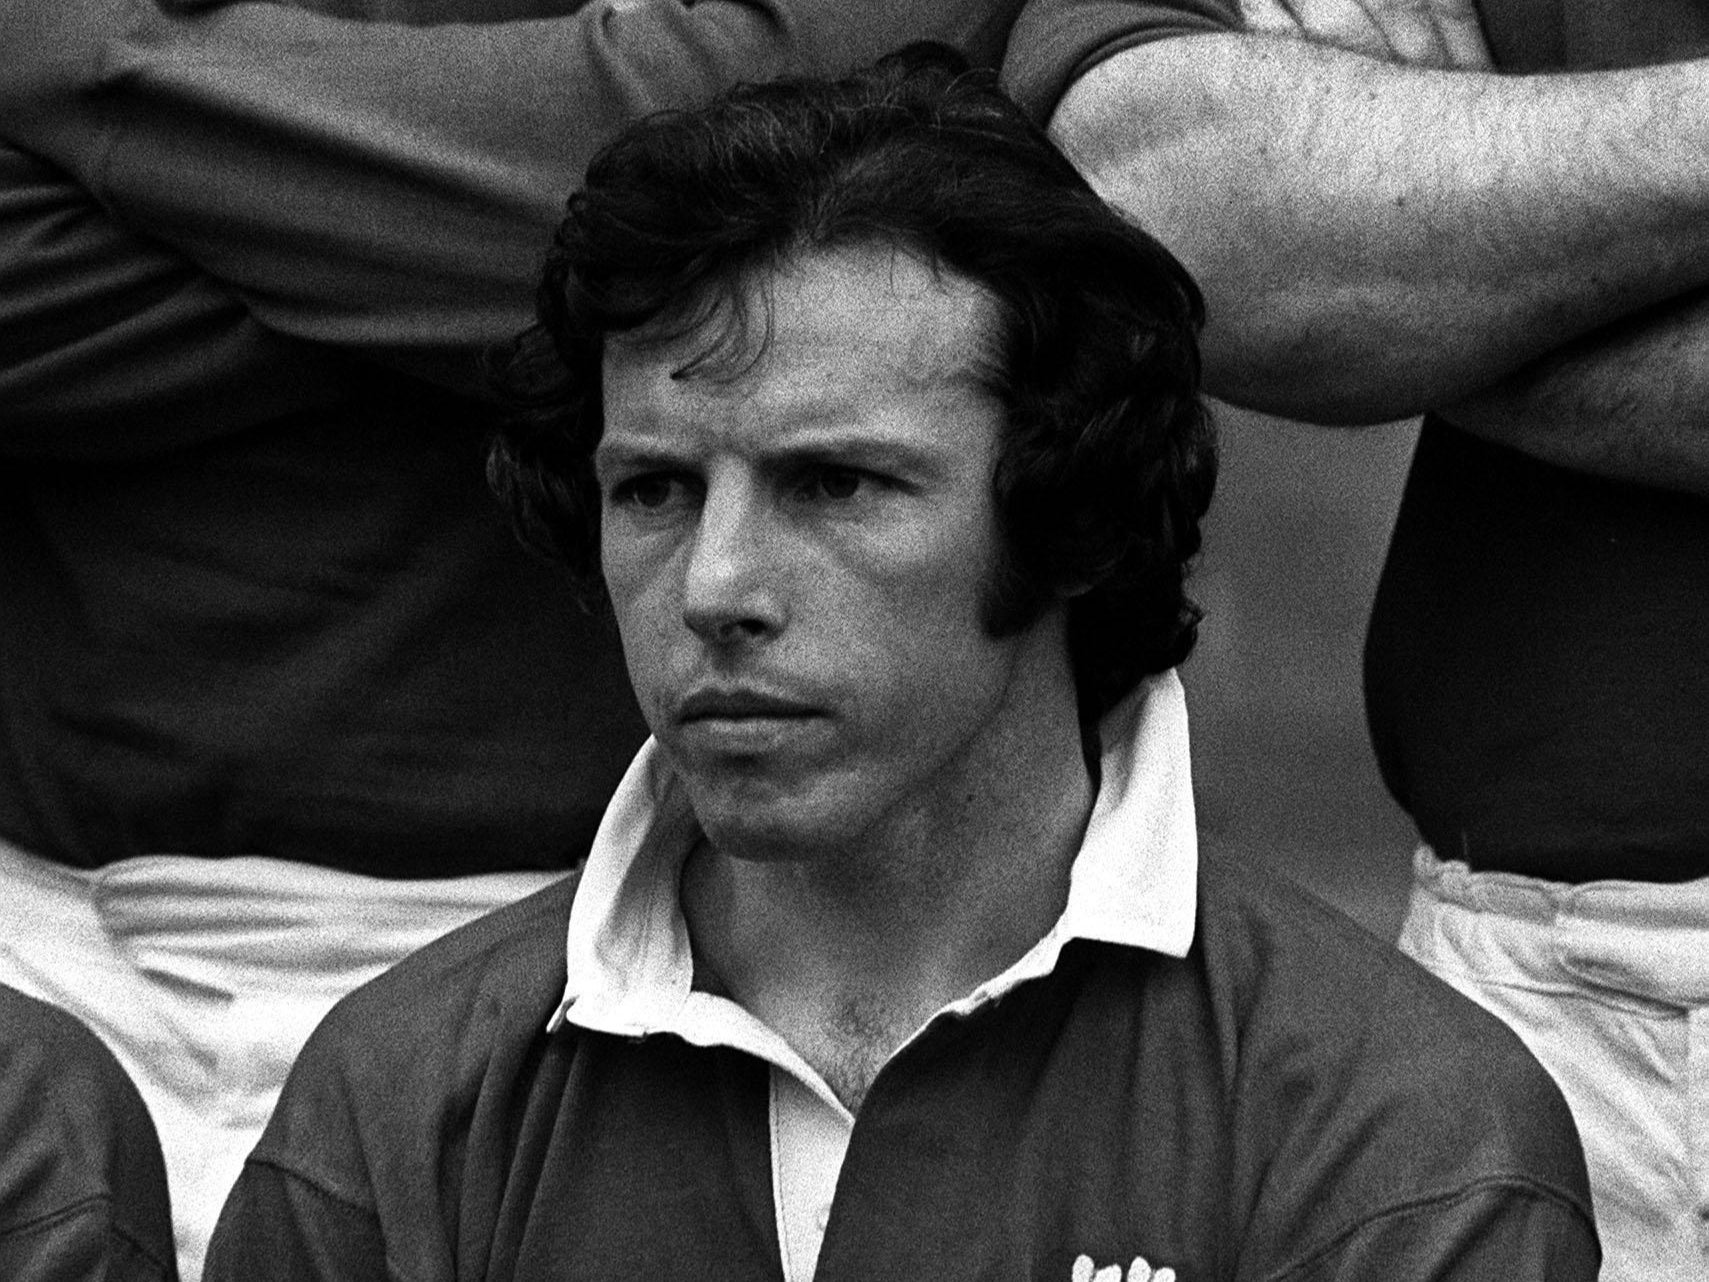 Former Welsh rugby player JJ Williams has died, aged 72